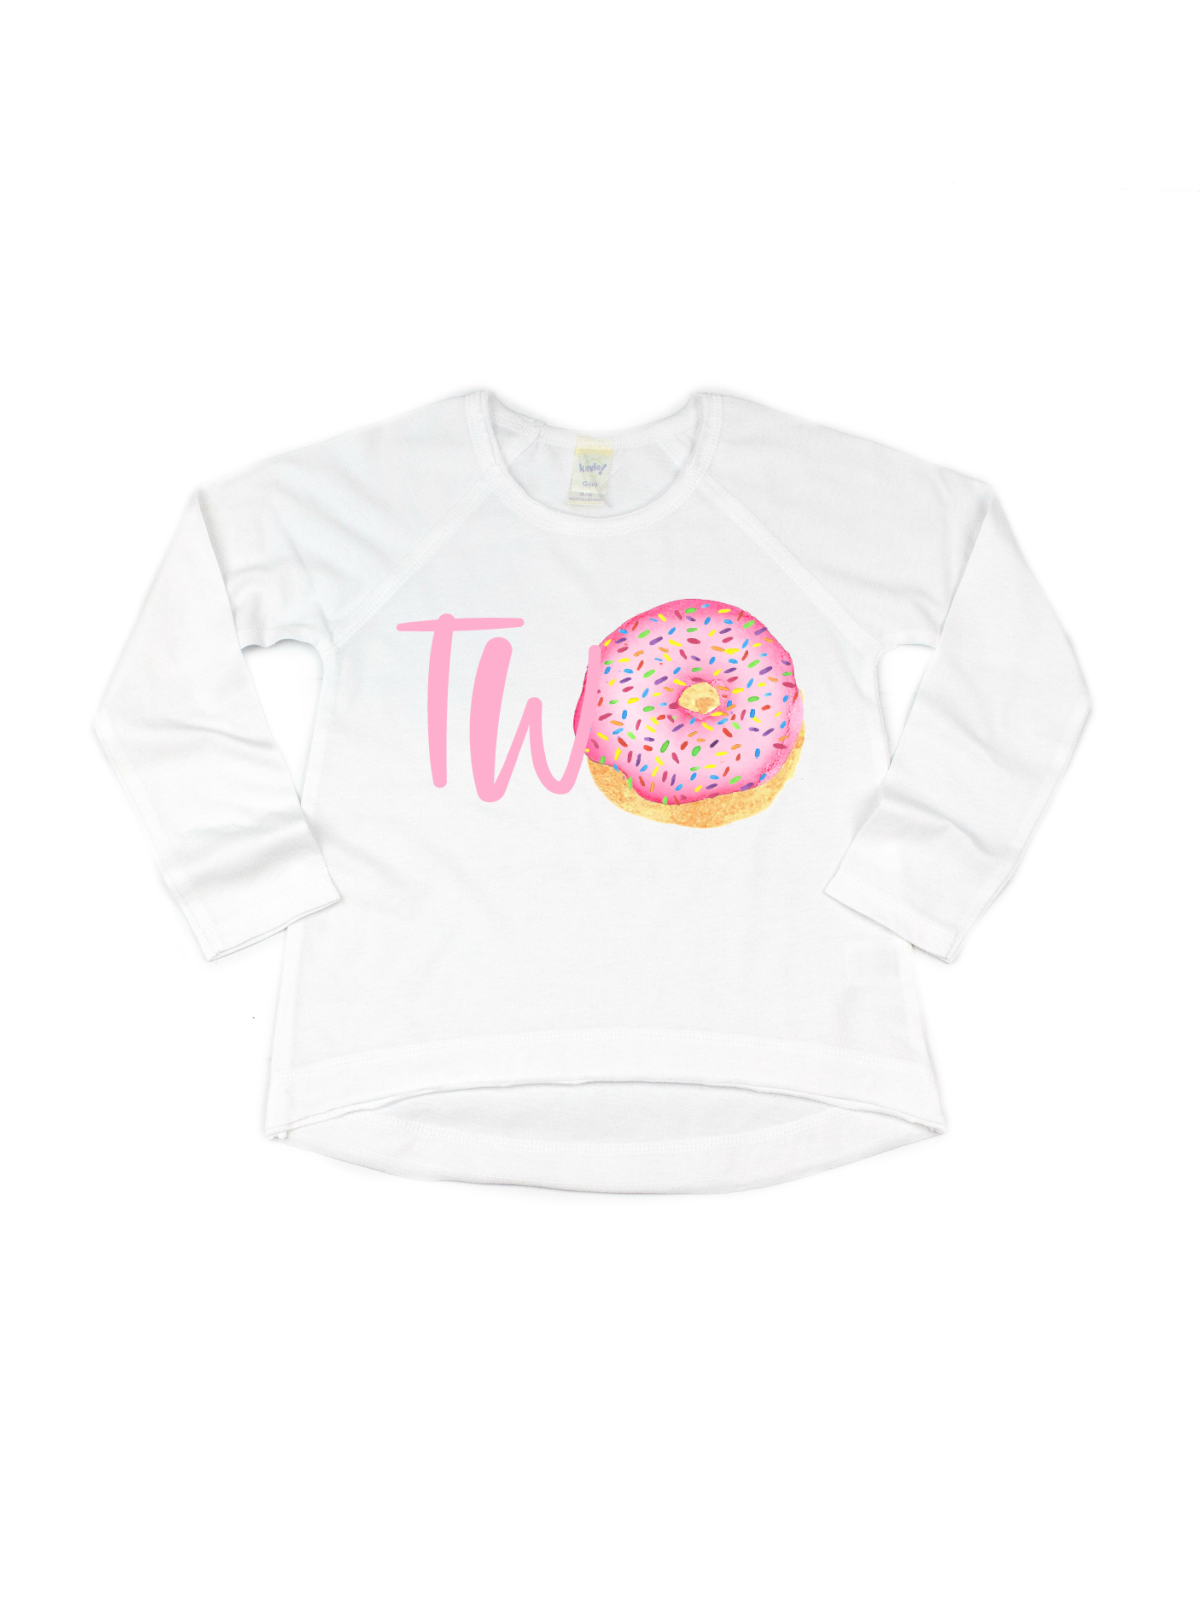 TWO Pink Sprinkles Donut Shirt - Personalized